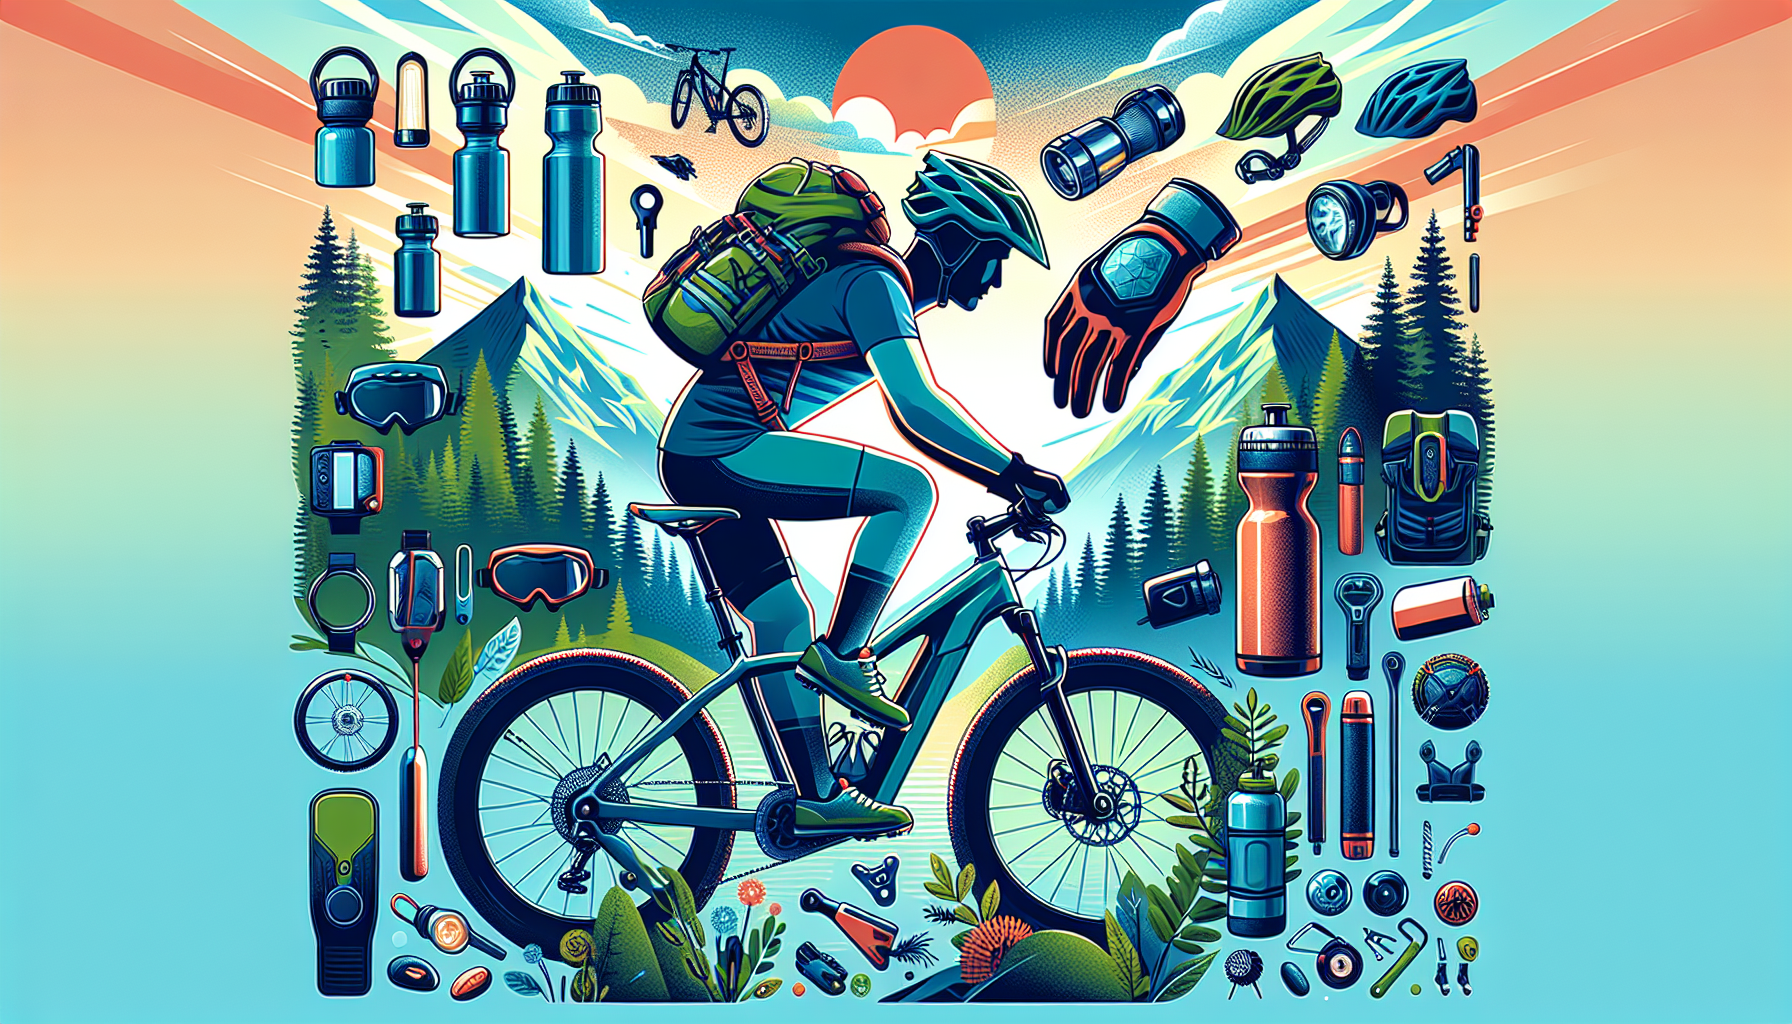 Enhance Your Bike Adventures with Cycling Accessories from Hannibal of New York